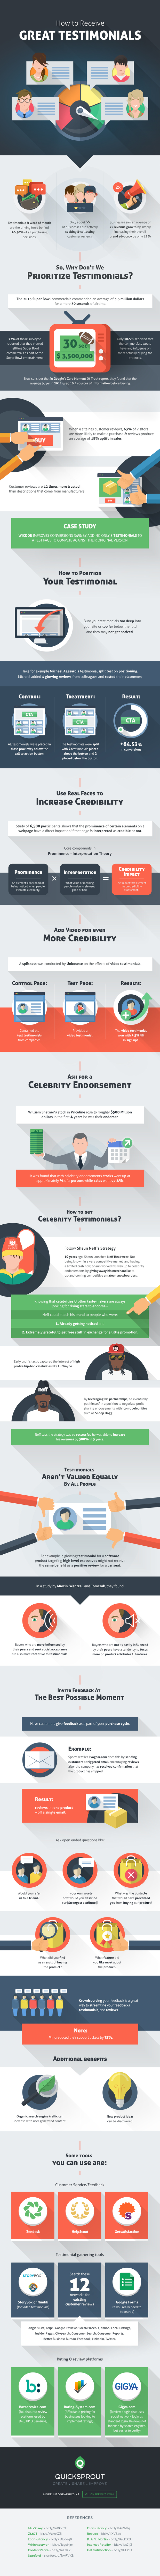 How to Receive Great Testimonials